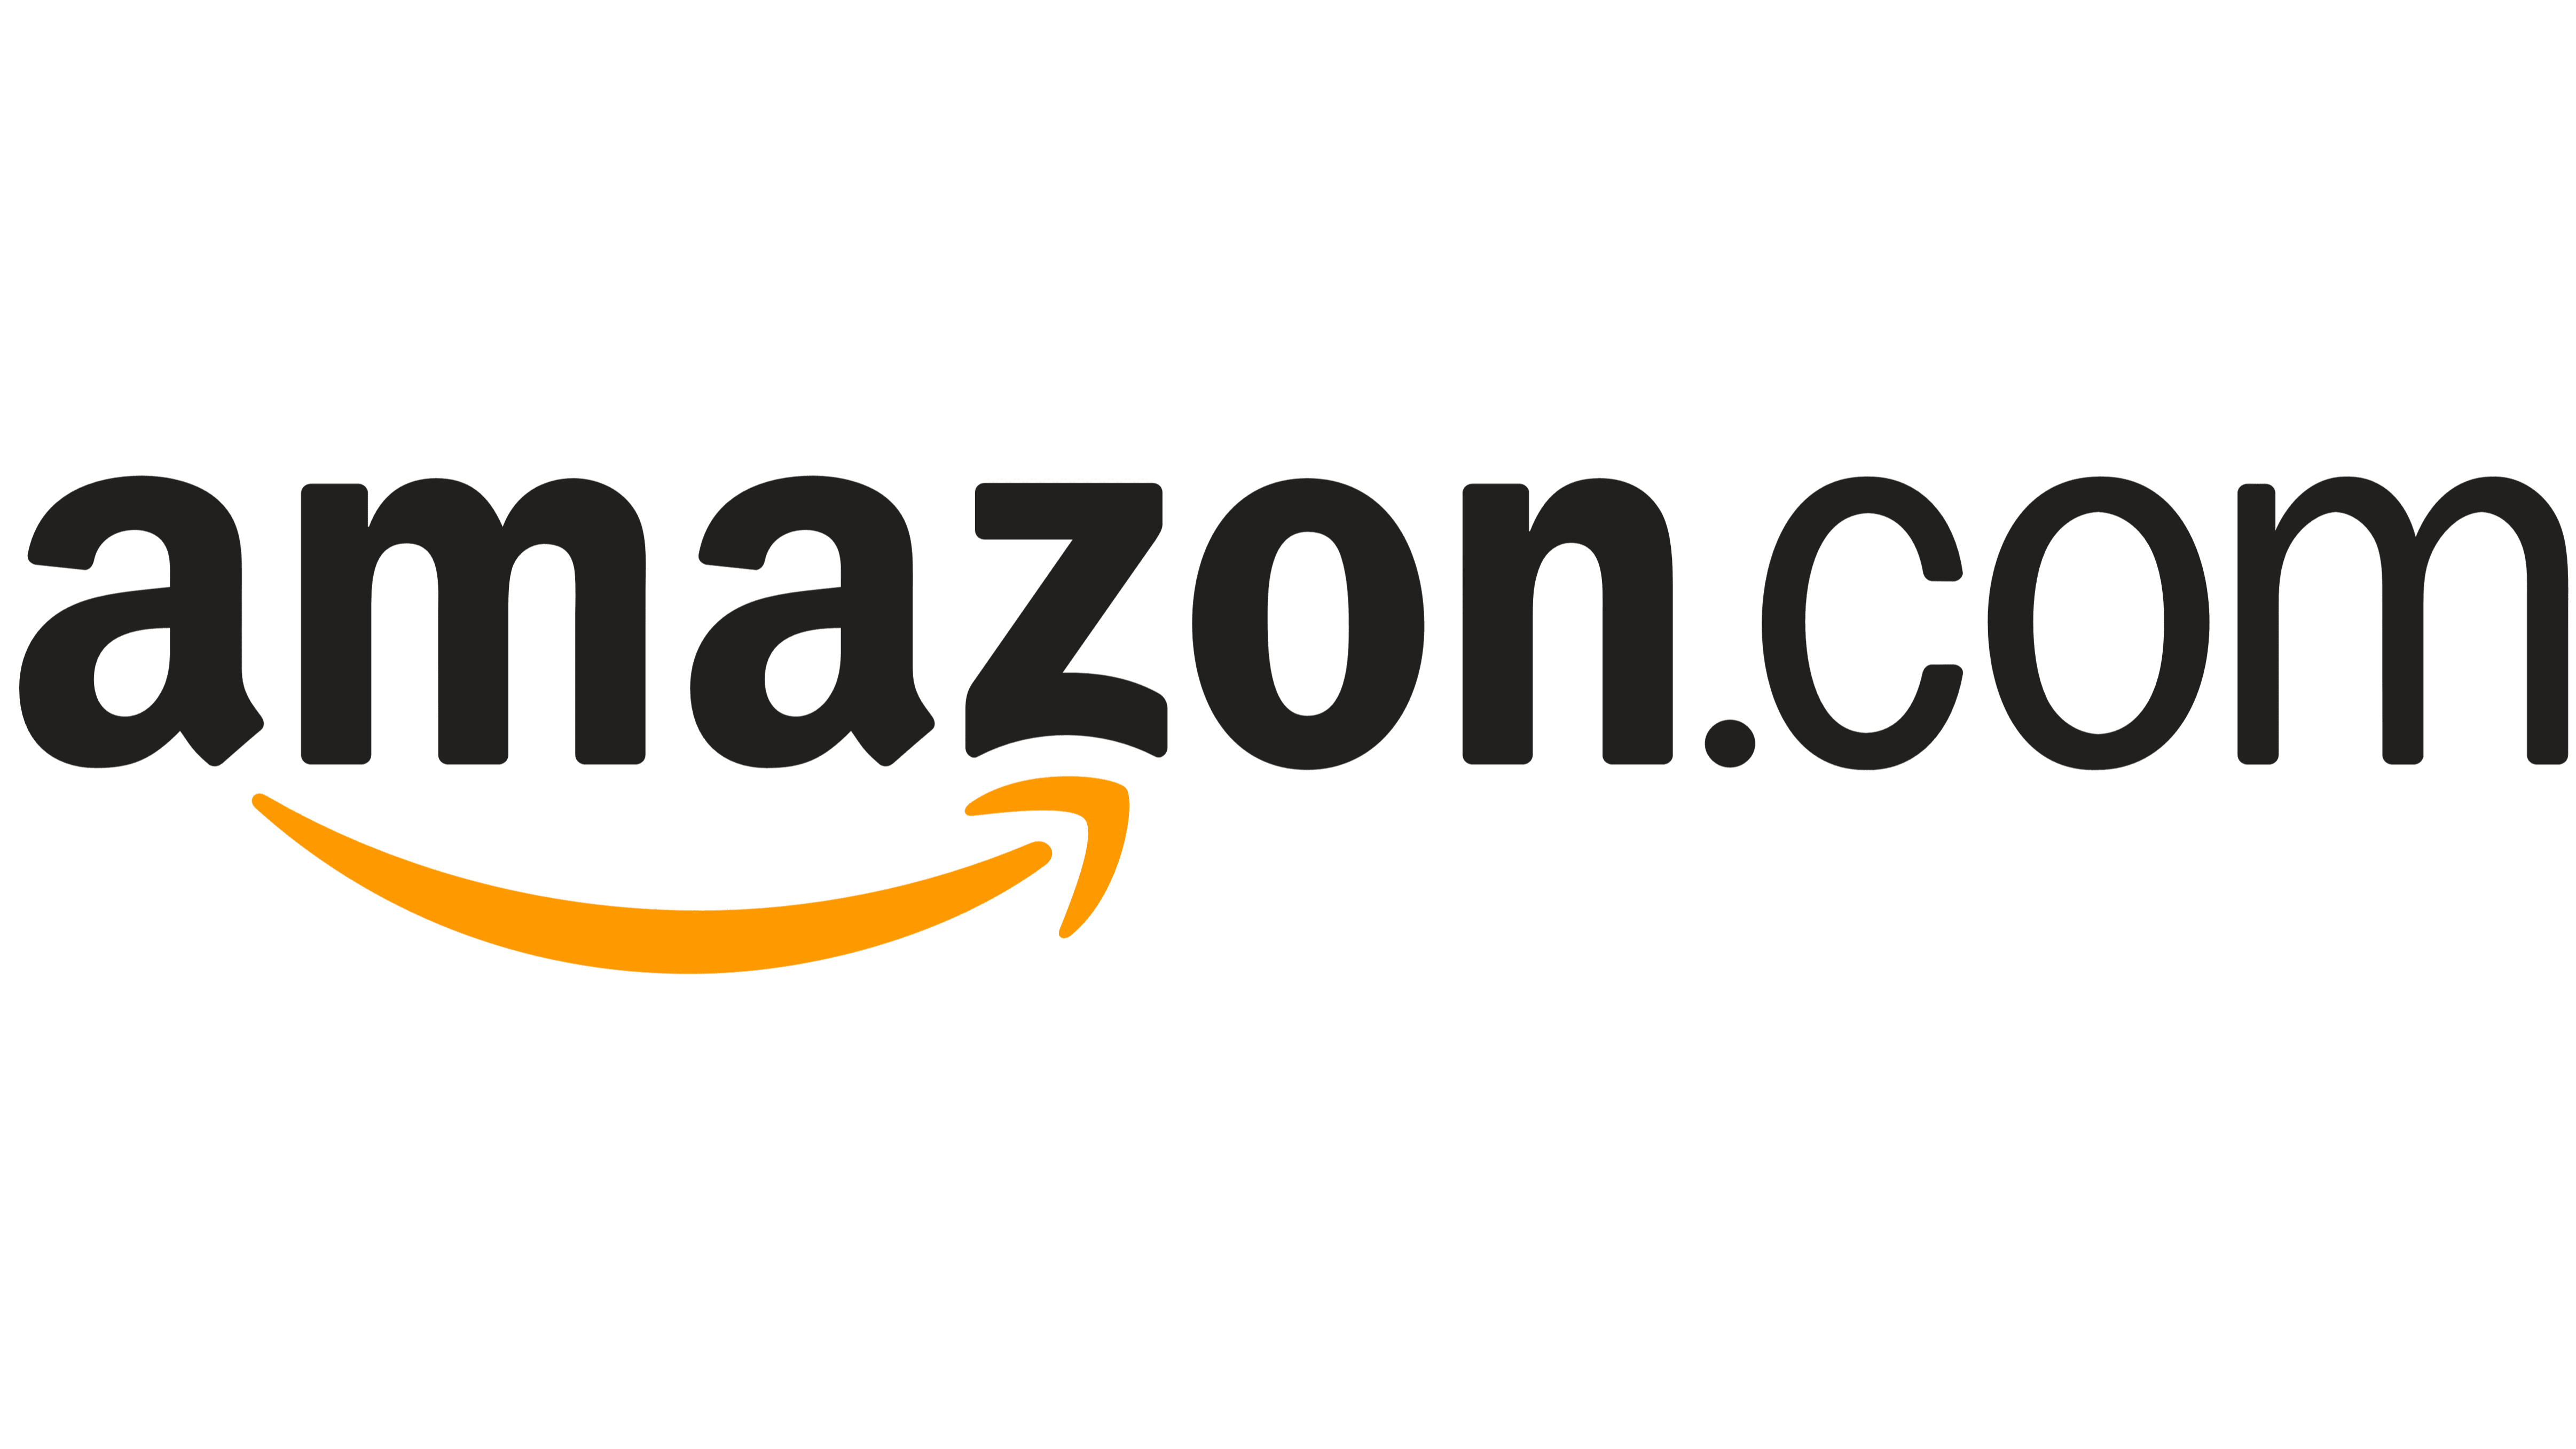 https://adgully.me/post/3079/amazon-is-consumers-preferred-ad-platform-for-a-second-year-in-a-row